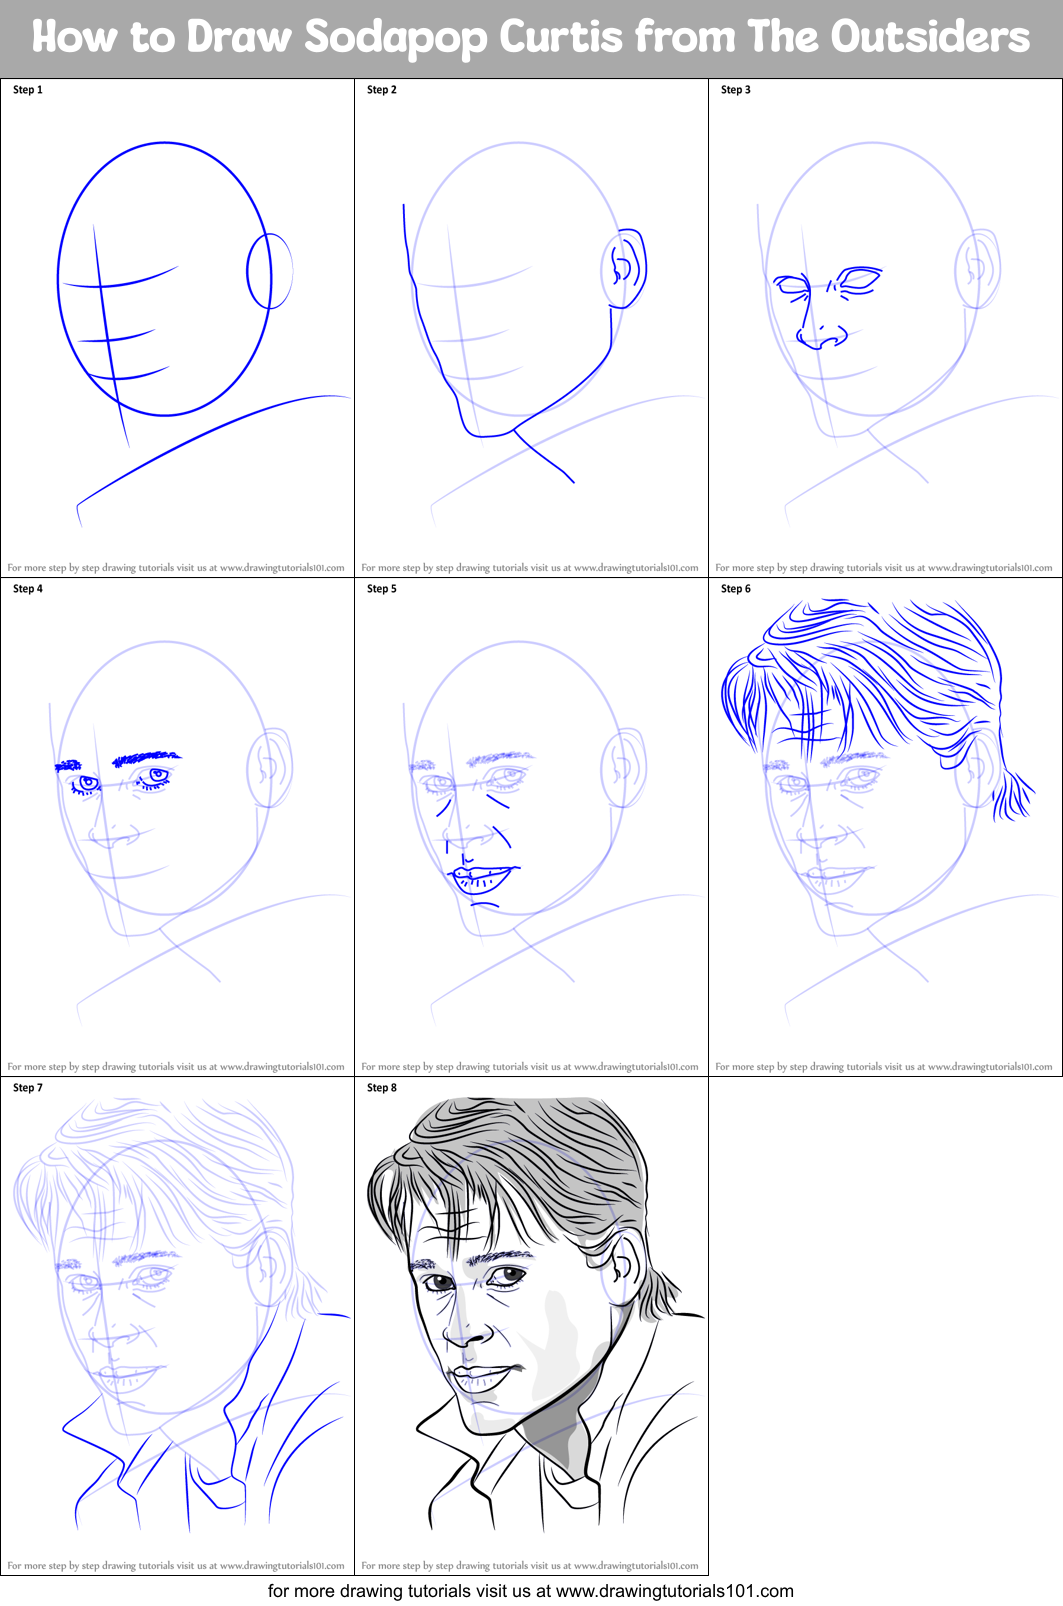 How to Draw Sodapop Curtis from The Outsiders printable step by step